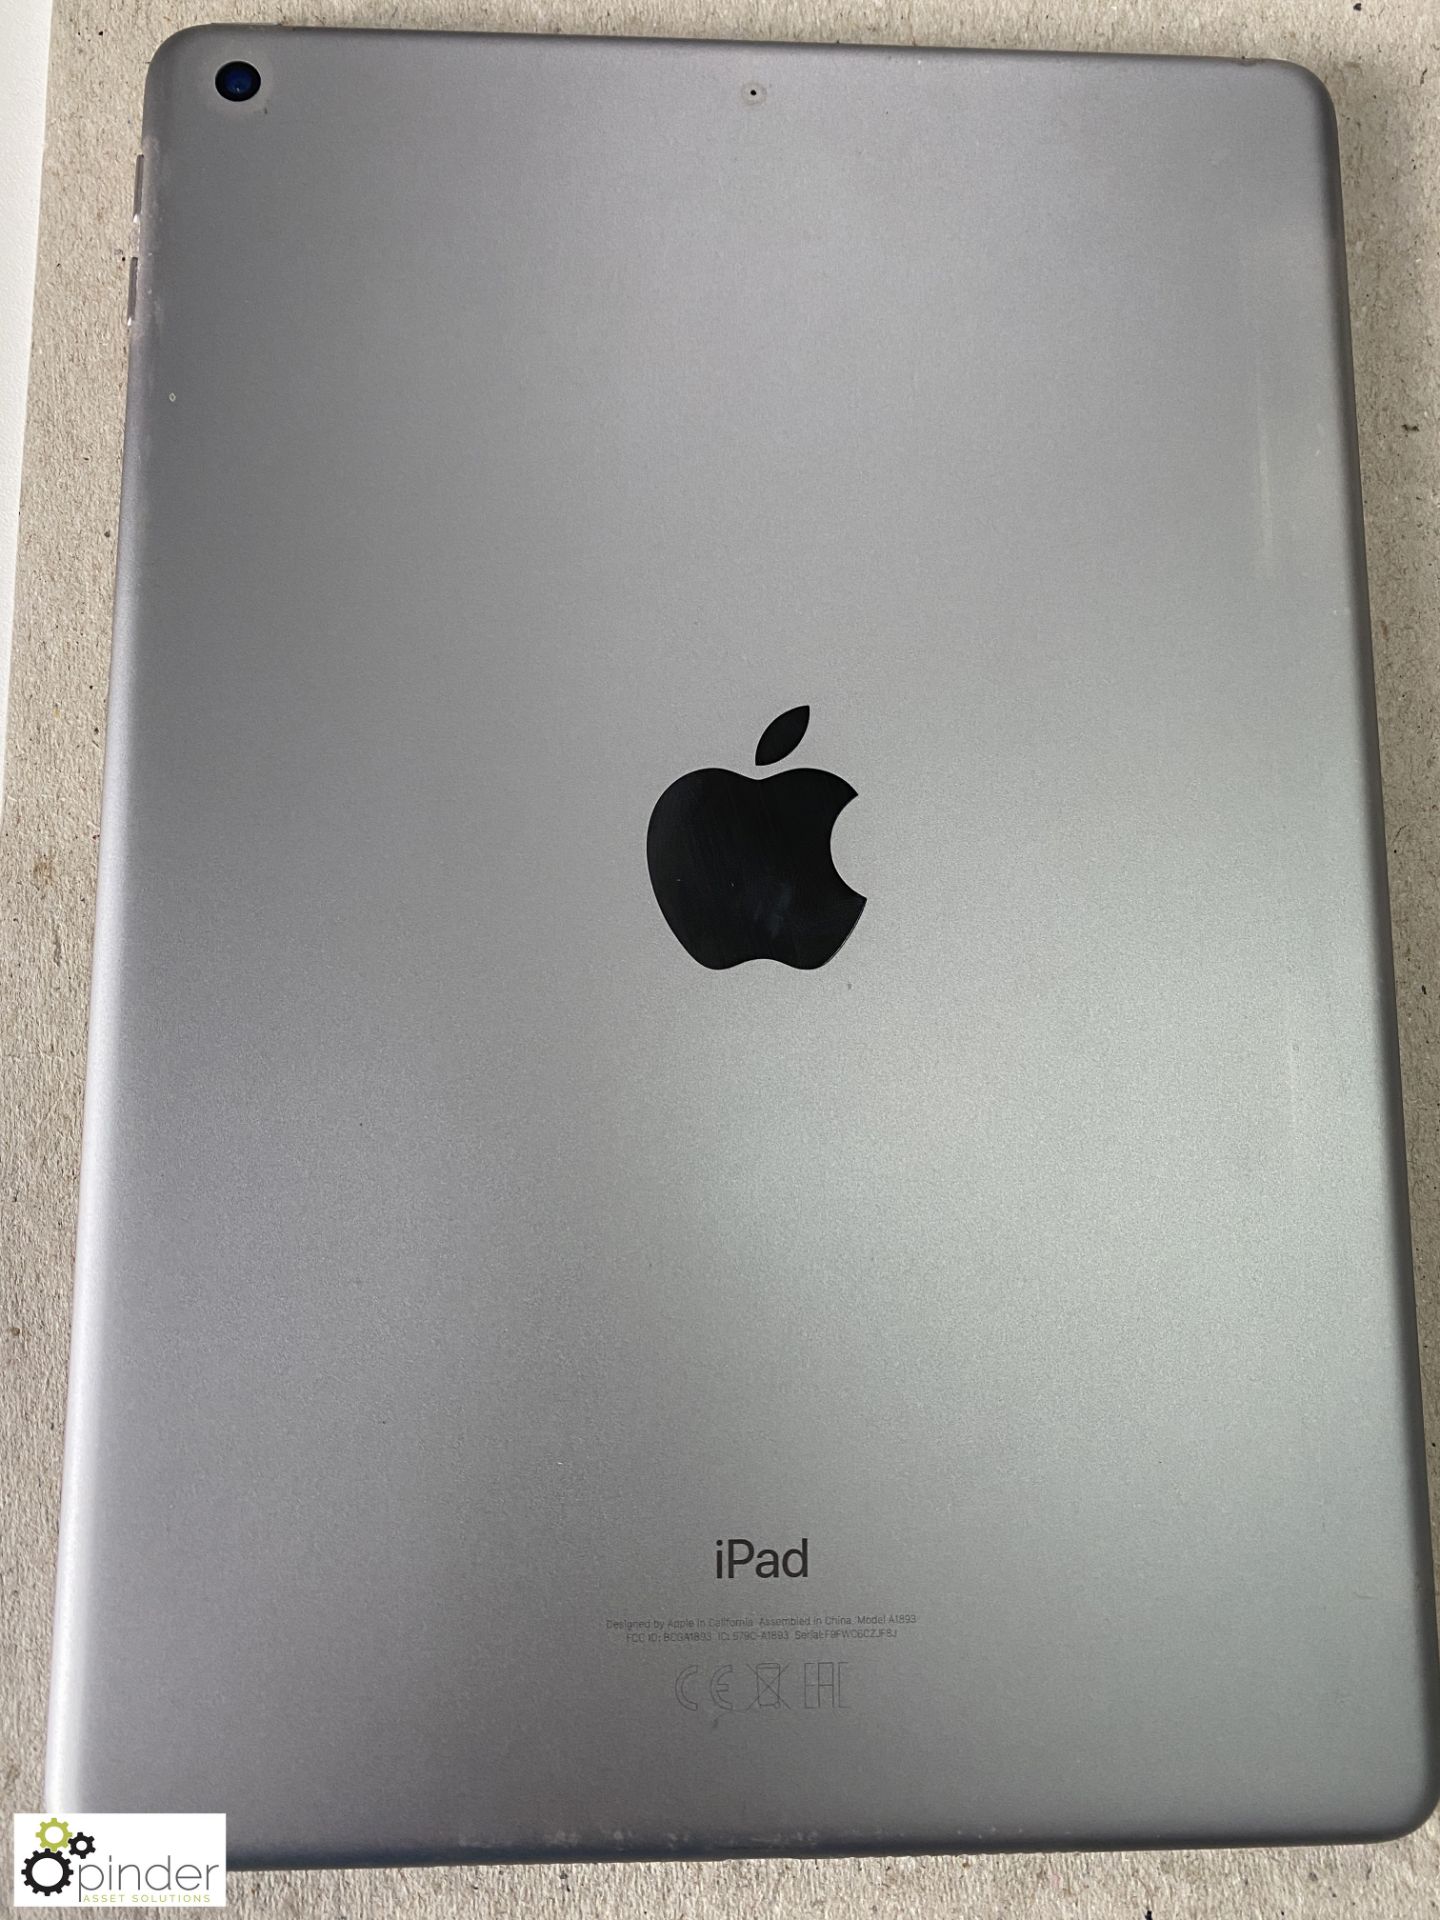 Apple iPad 6th Gen, 9.7in, 32GB, model A1893, reset and ready for use, with case, no lead or charger - Image 4 of 8